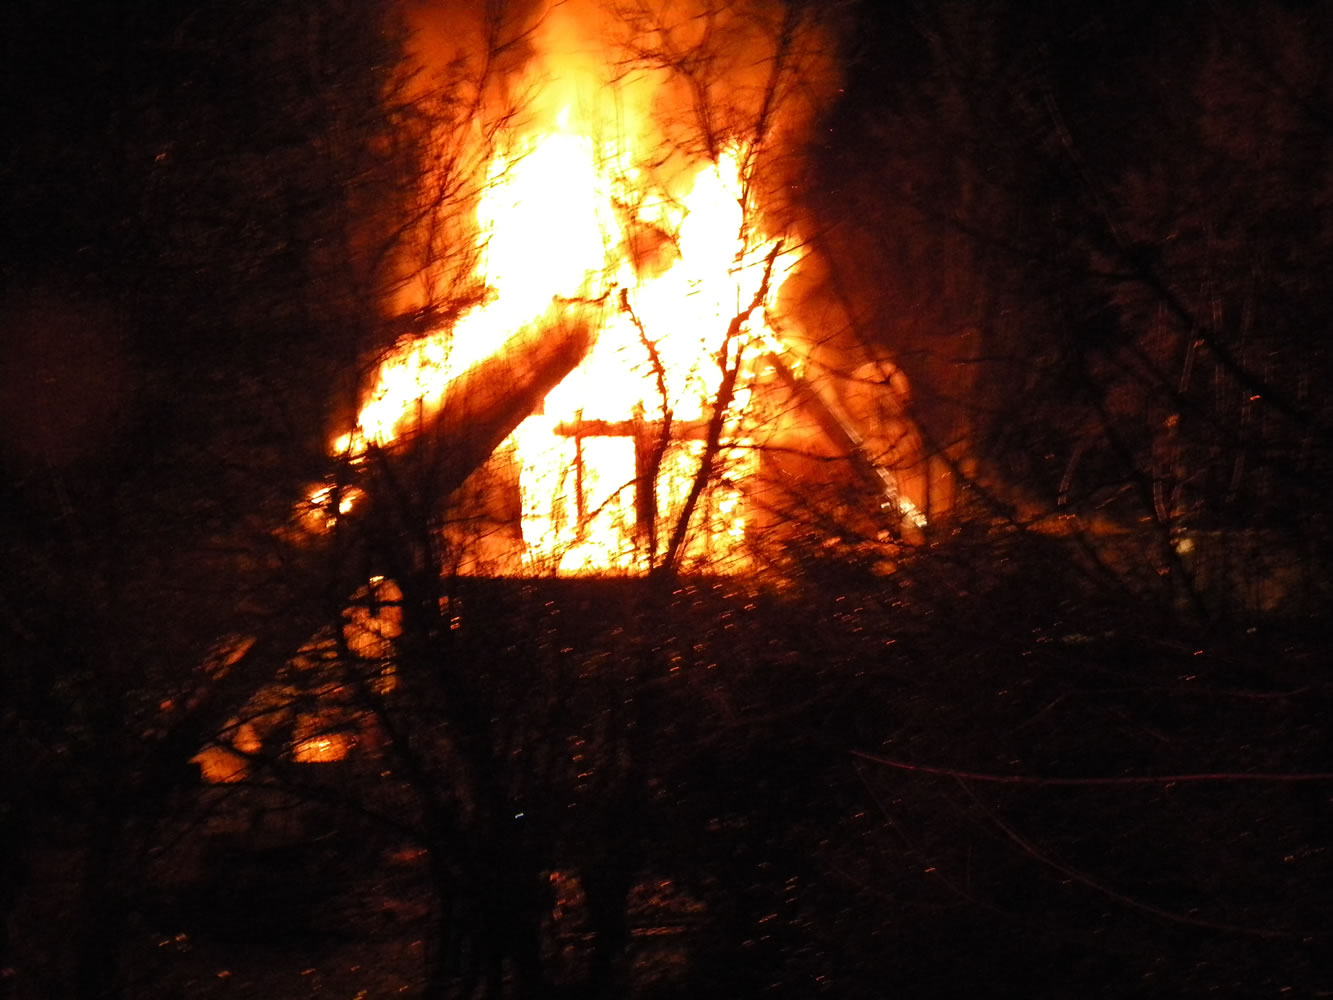 Two Cowlitz County firefighters were injured while fighting this blaze Sunday.